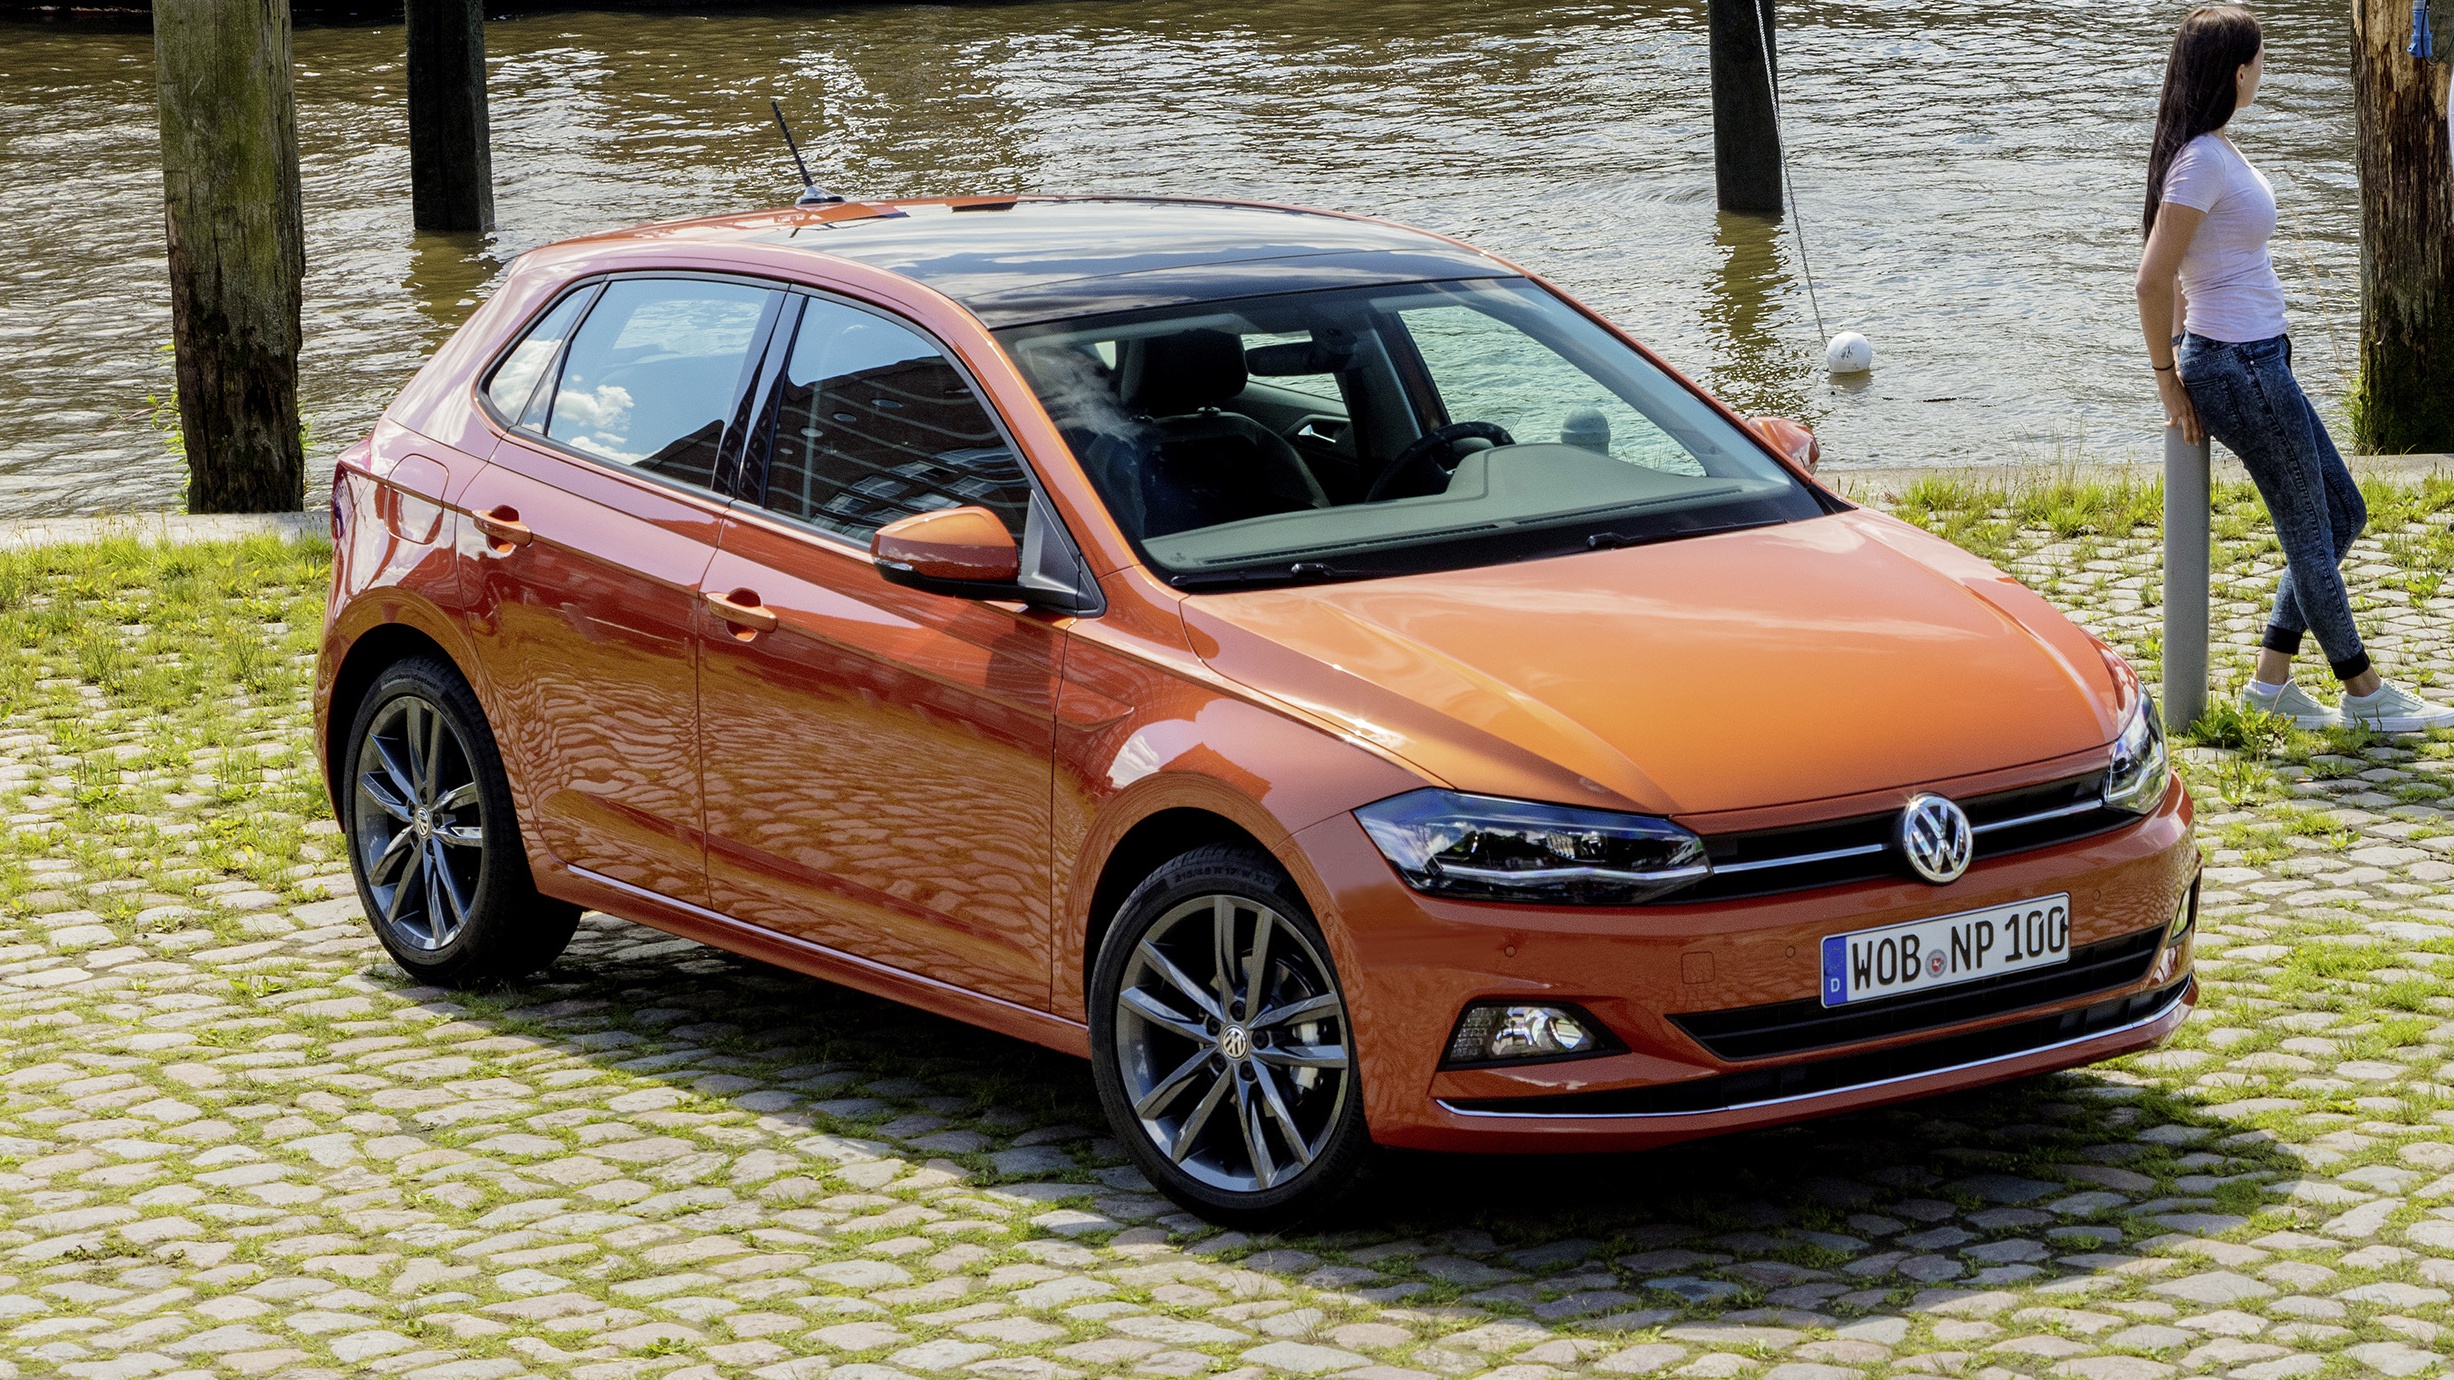 News Volkswagen Details The AllNew Polo, Starting At 18k